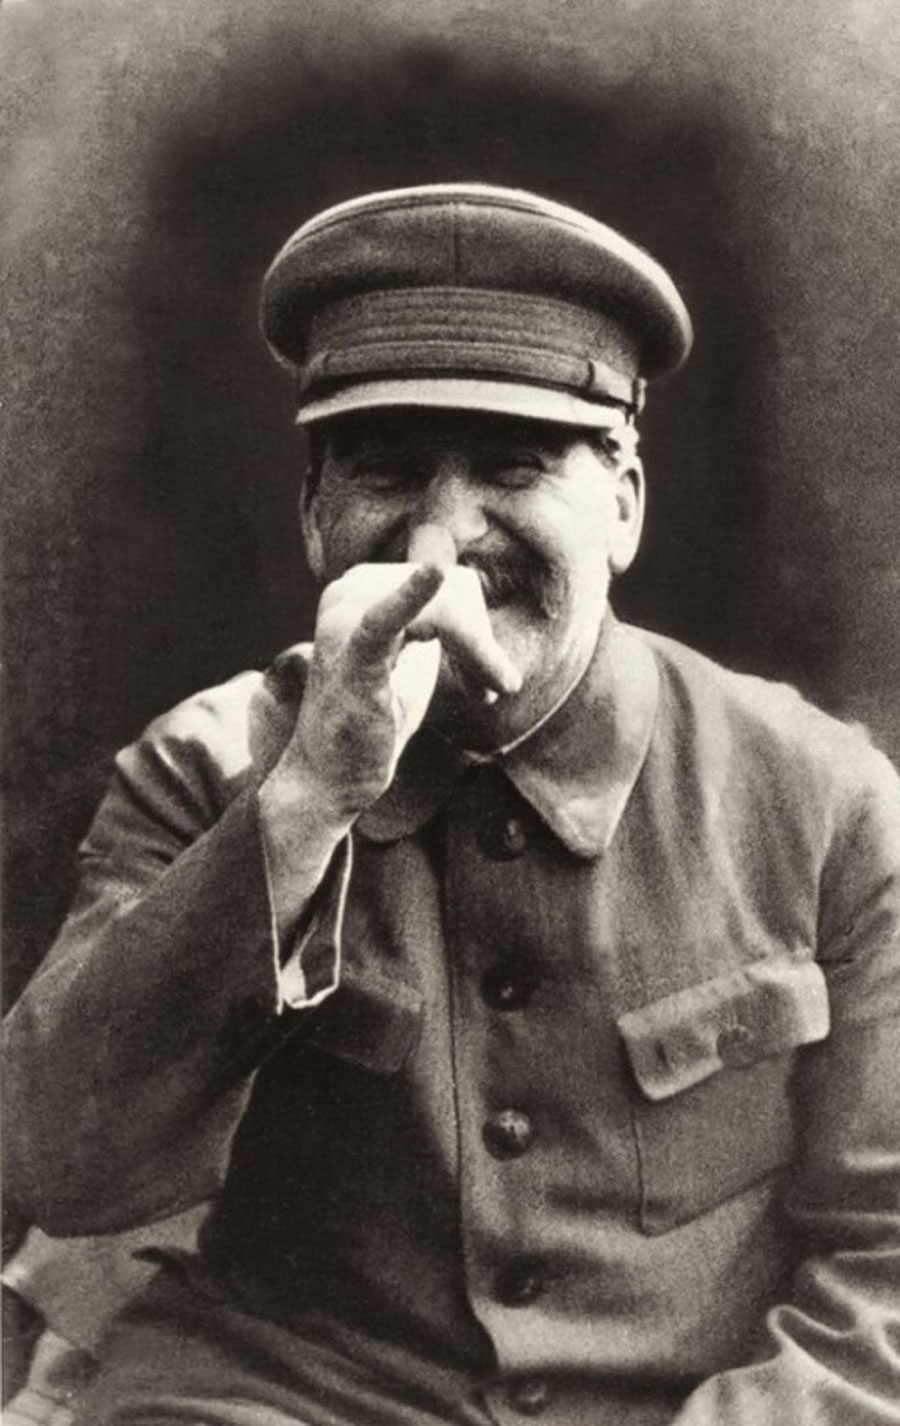 Stalin making a face